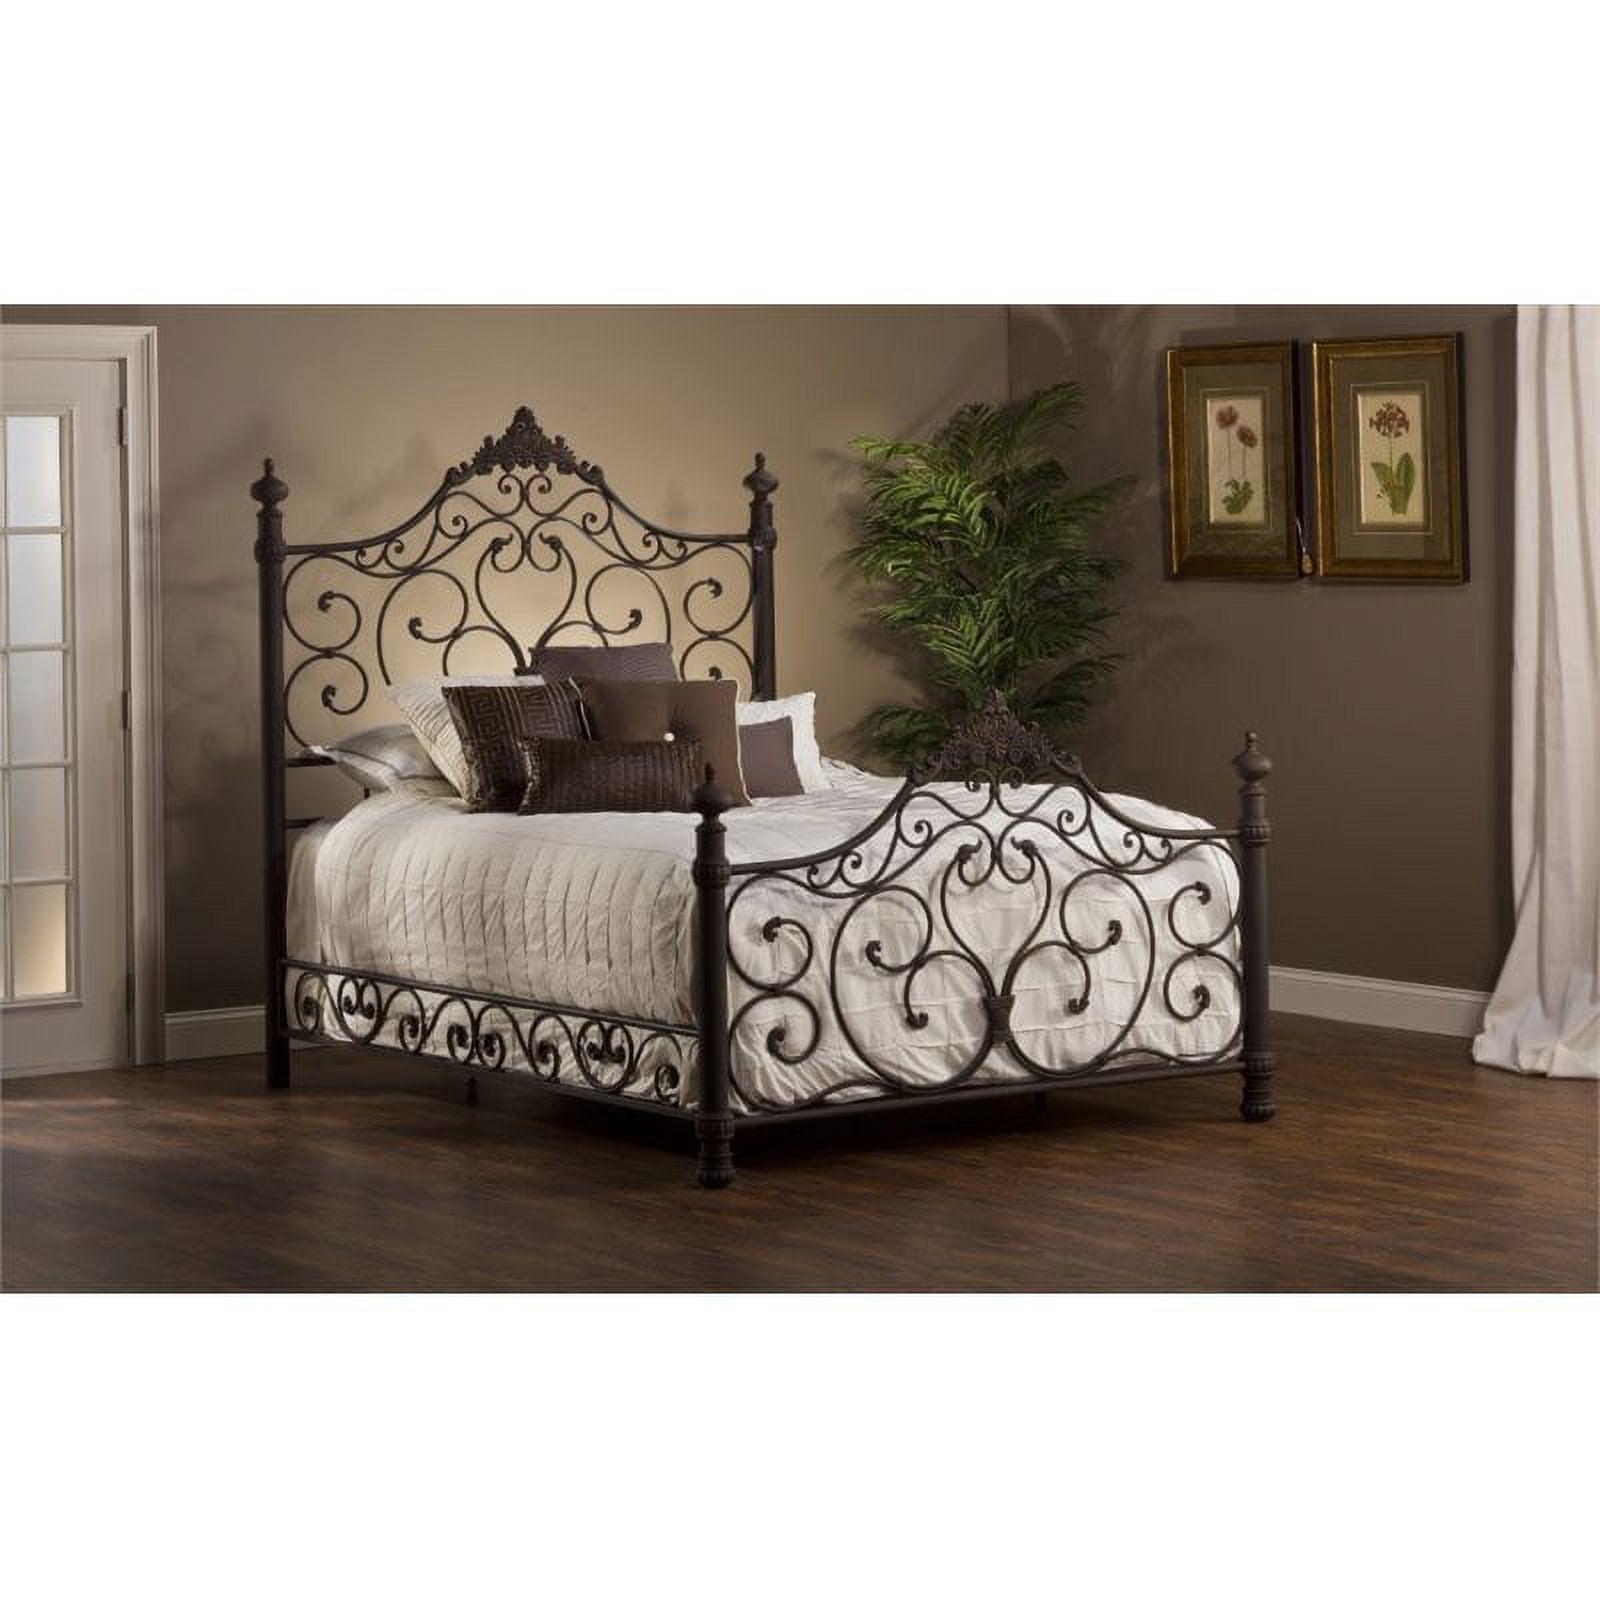 Baremore King-Size Metal Bed with Headboard in Antique Brown